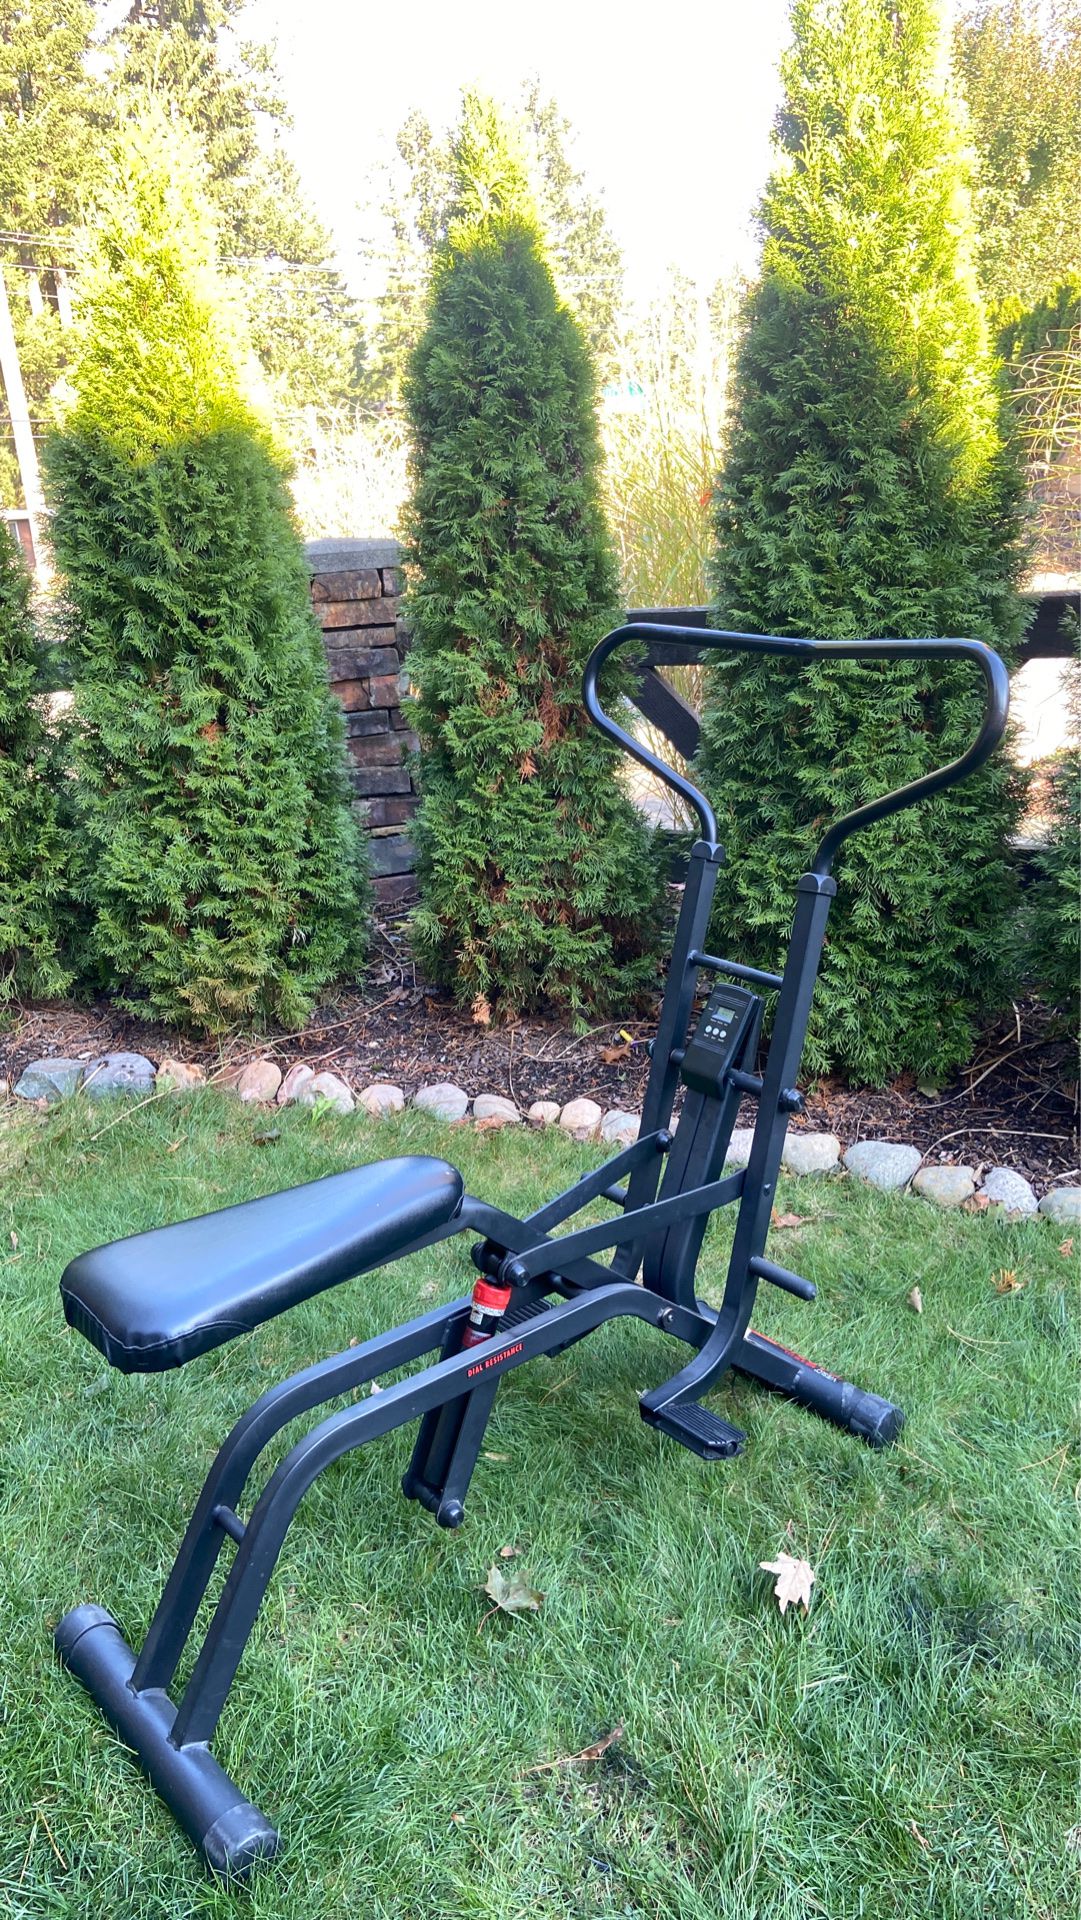 WESLO cardio glide Health rider with Monitor Total body works out